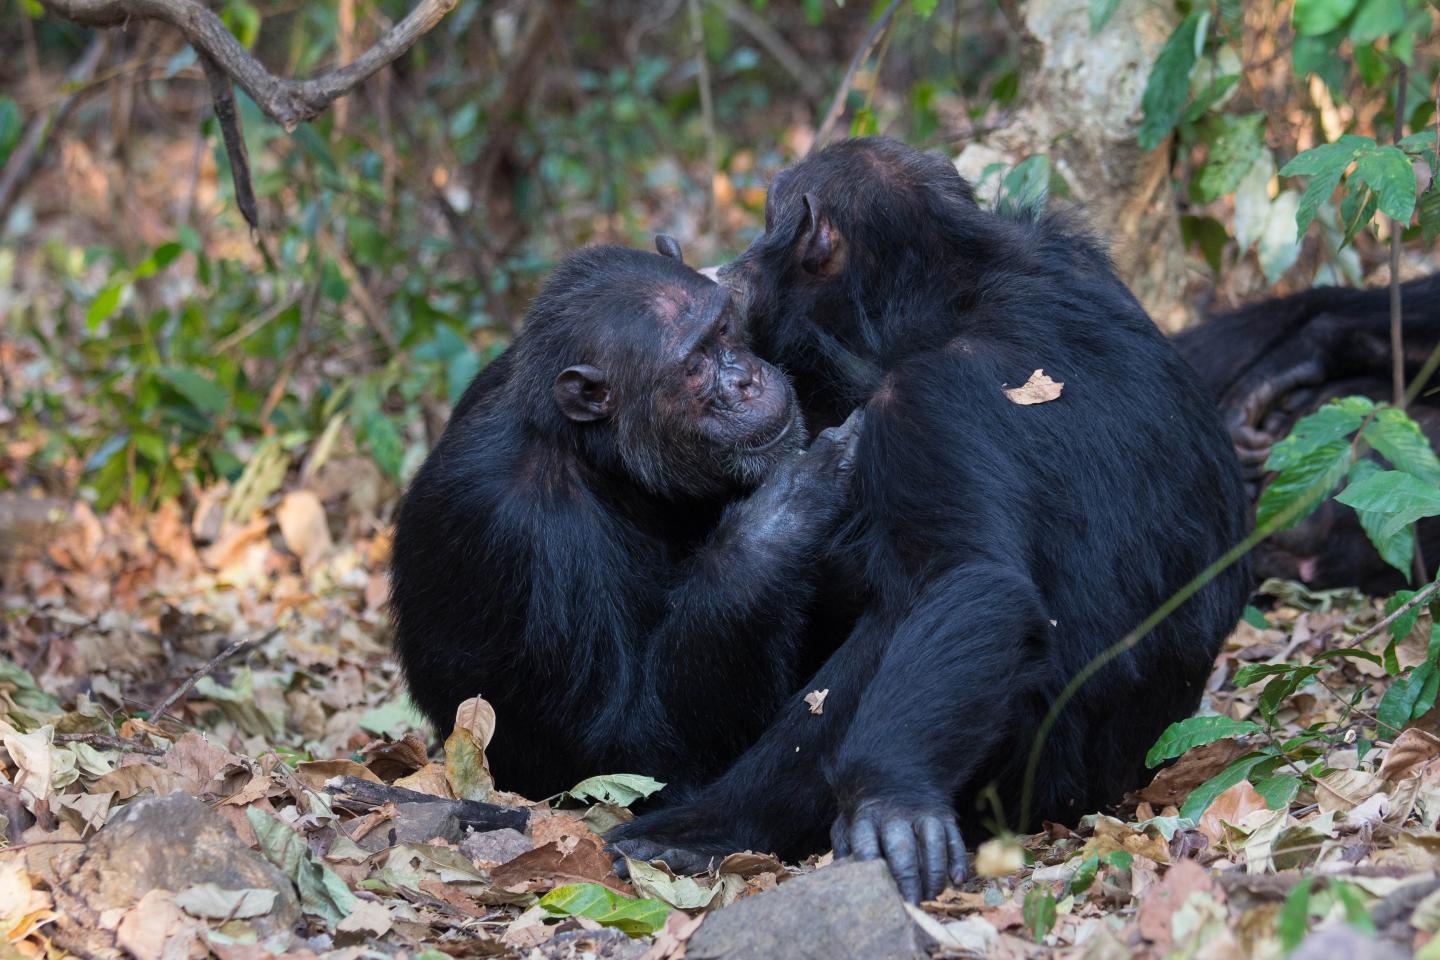 Being Sociable Boosts Gut Microbe Diversity In Chimpanzees